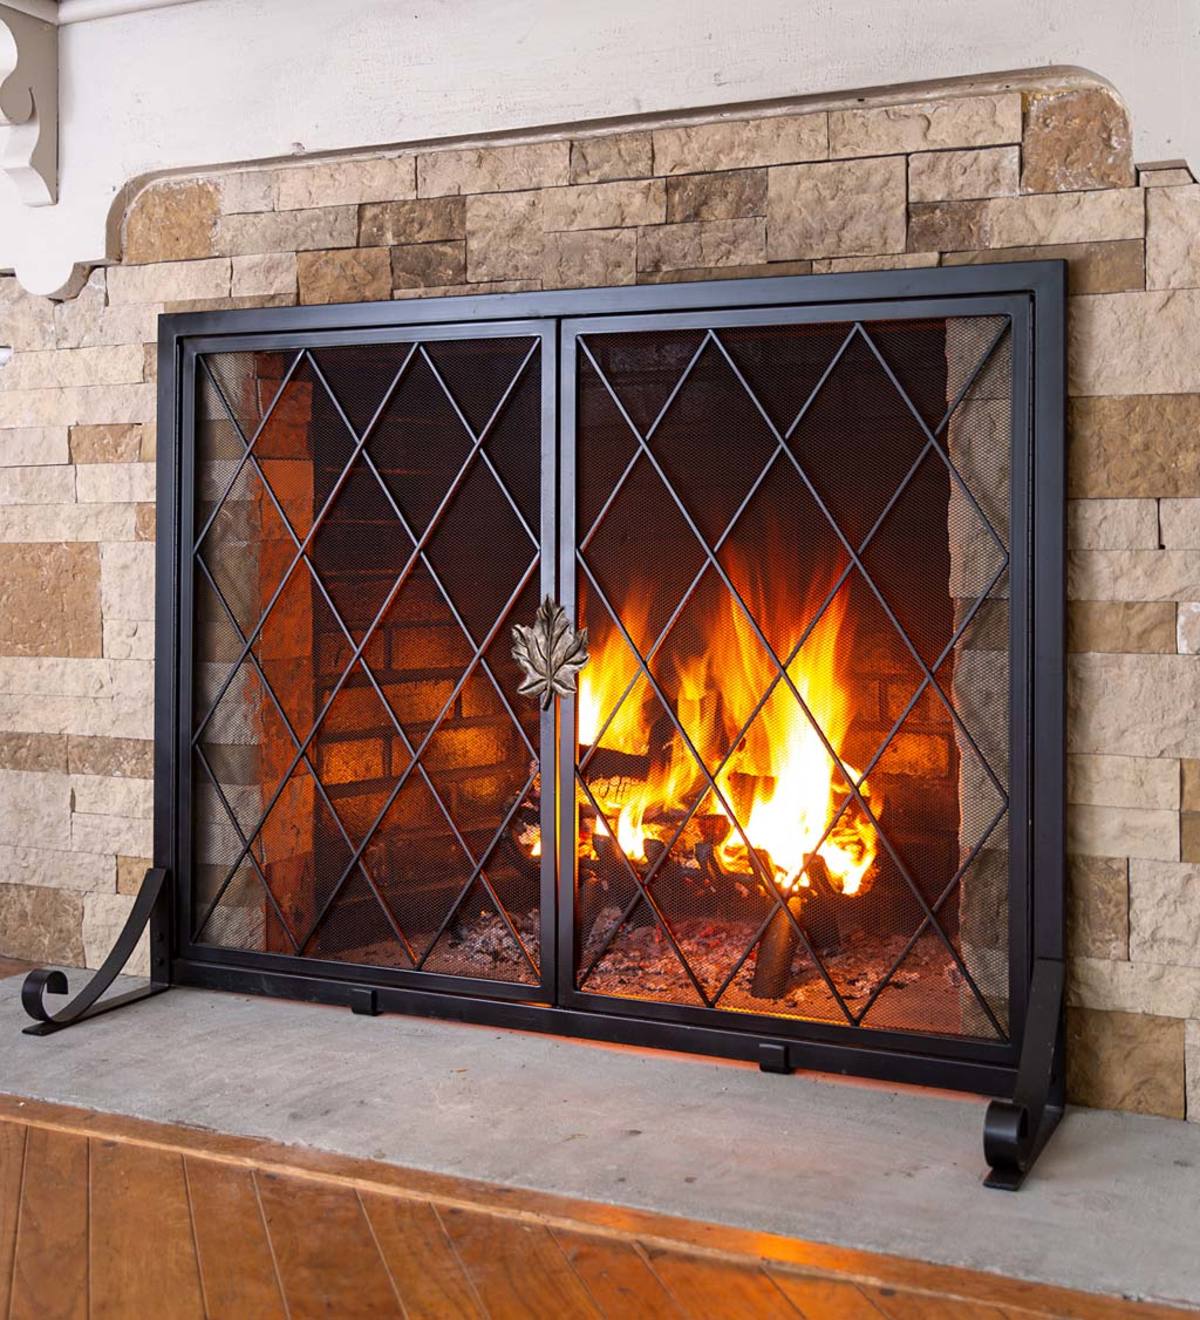 Large Middleton Fireplace Screen with Doors | Plow & Hearth